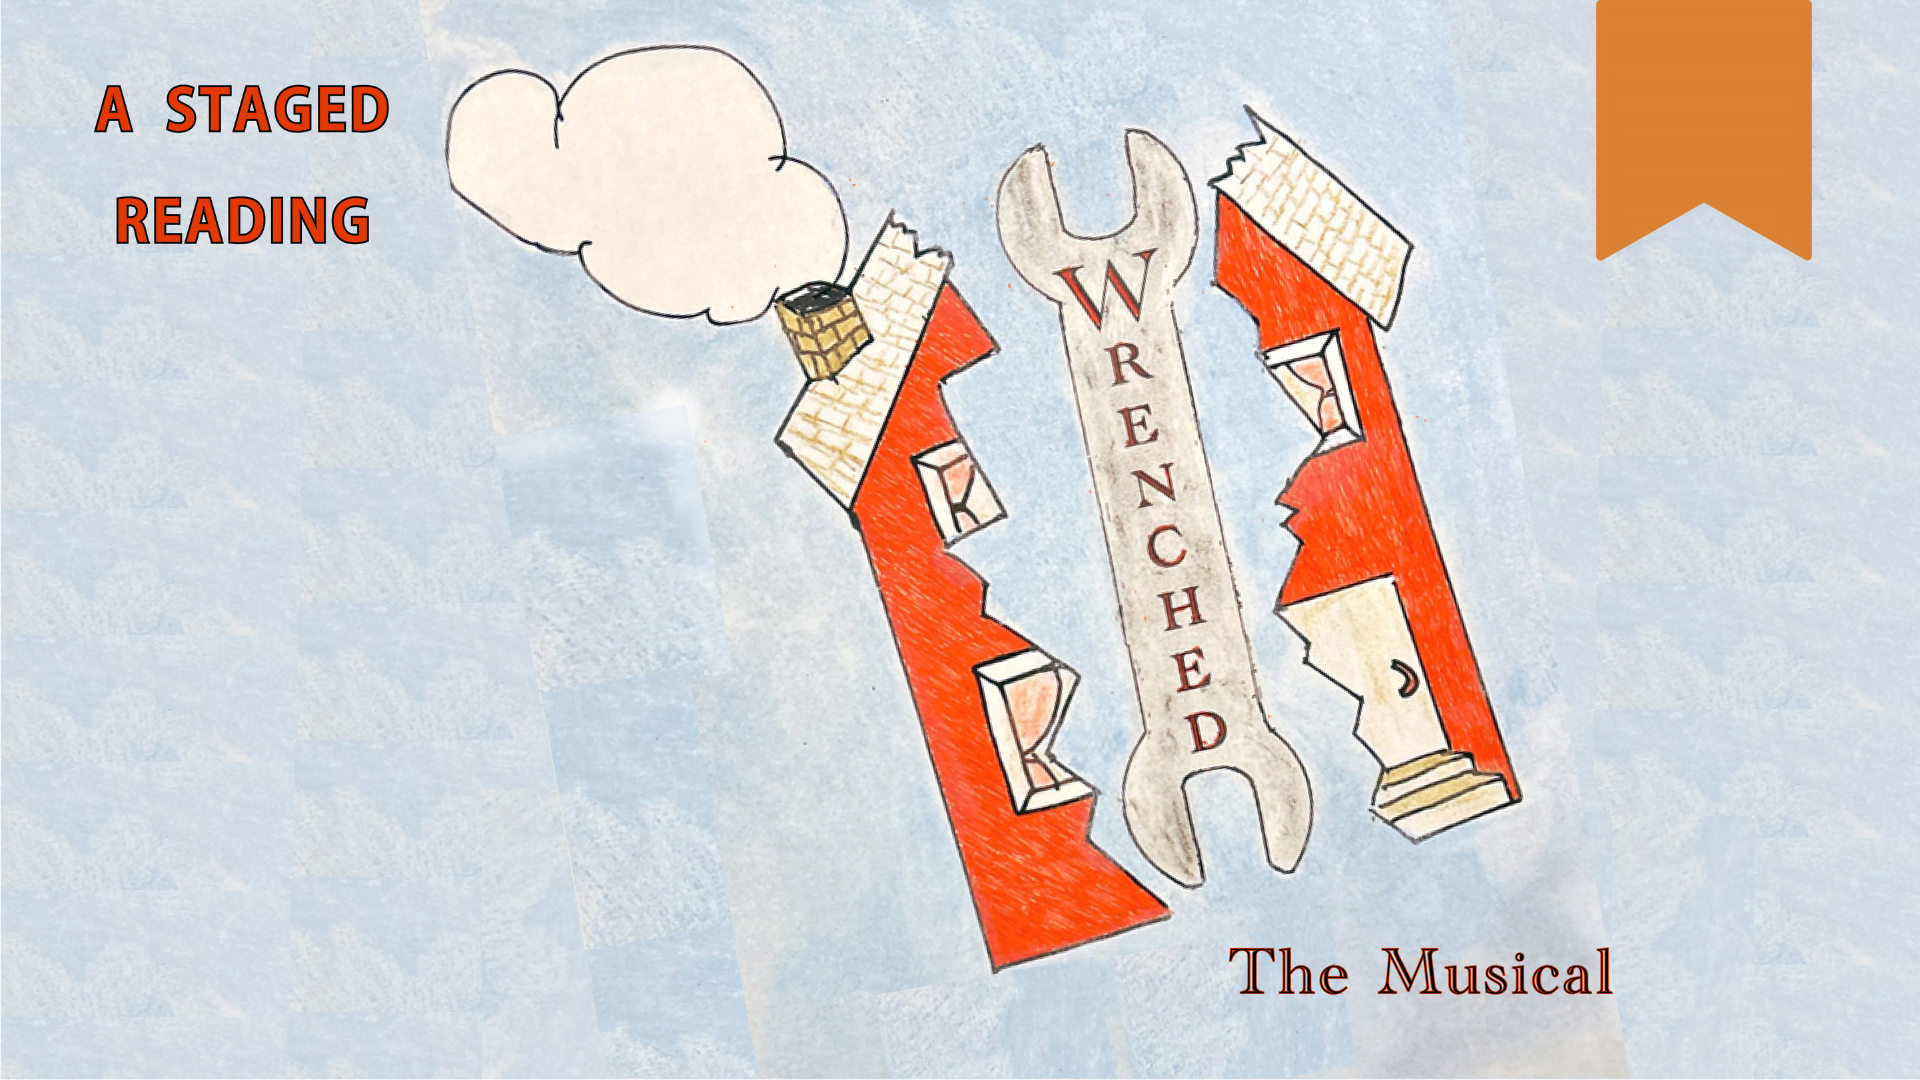 A banner image for "Wrenched: The Musical", with the subtitle "A Staged Reading", with an orange bookmark tab, categorizing this show as Hub Happenings.